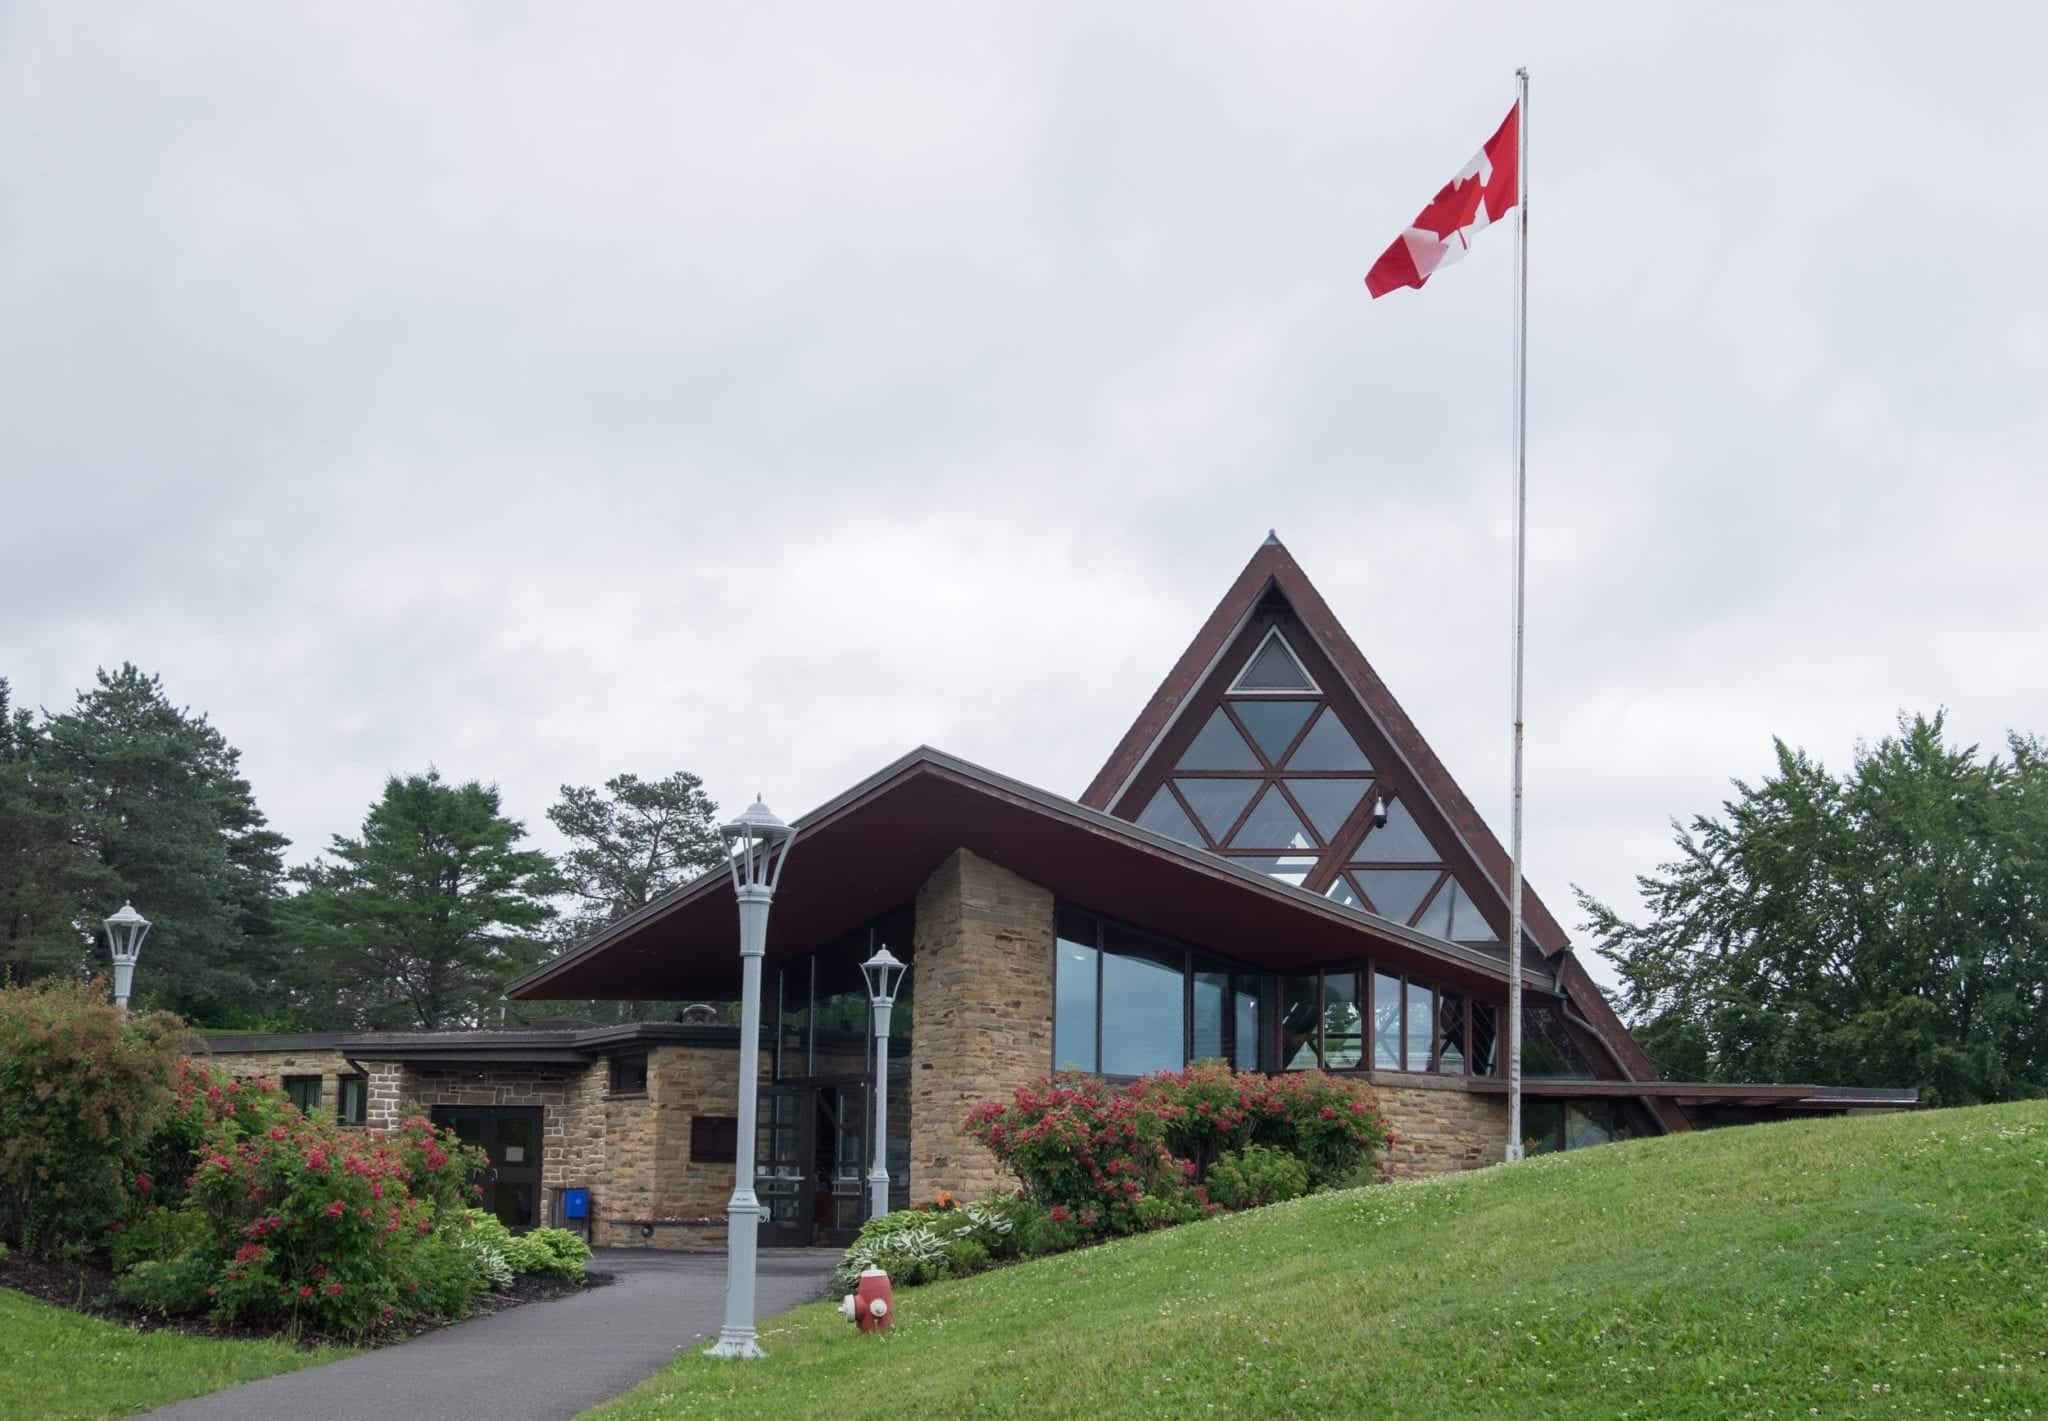 A modern triangular church-shaped building with a Canadian flag flying in front.